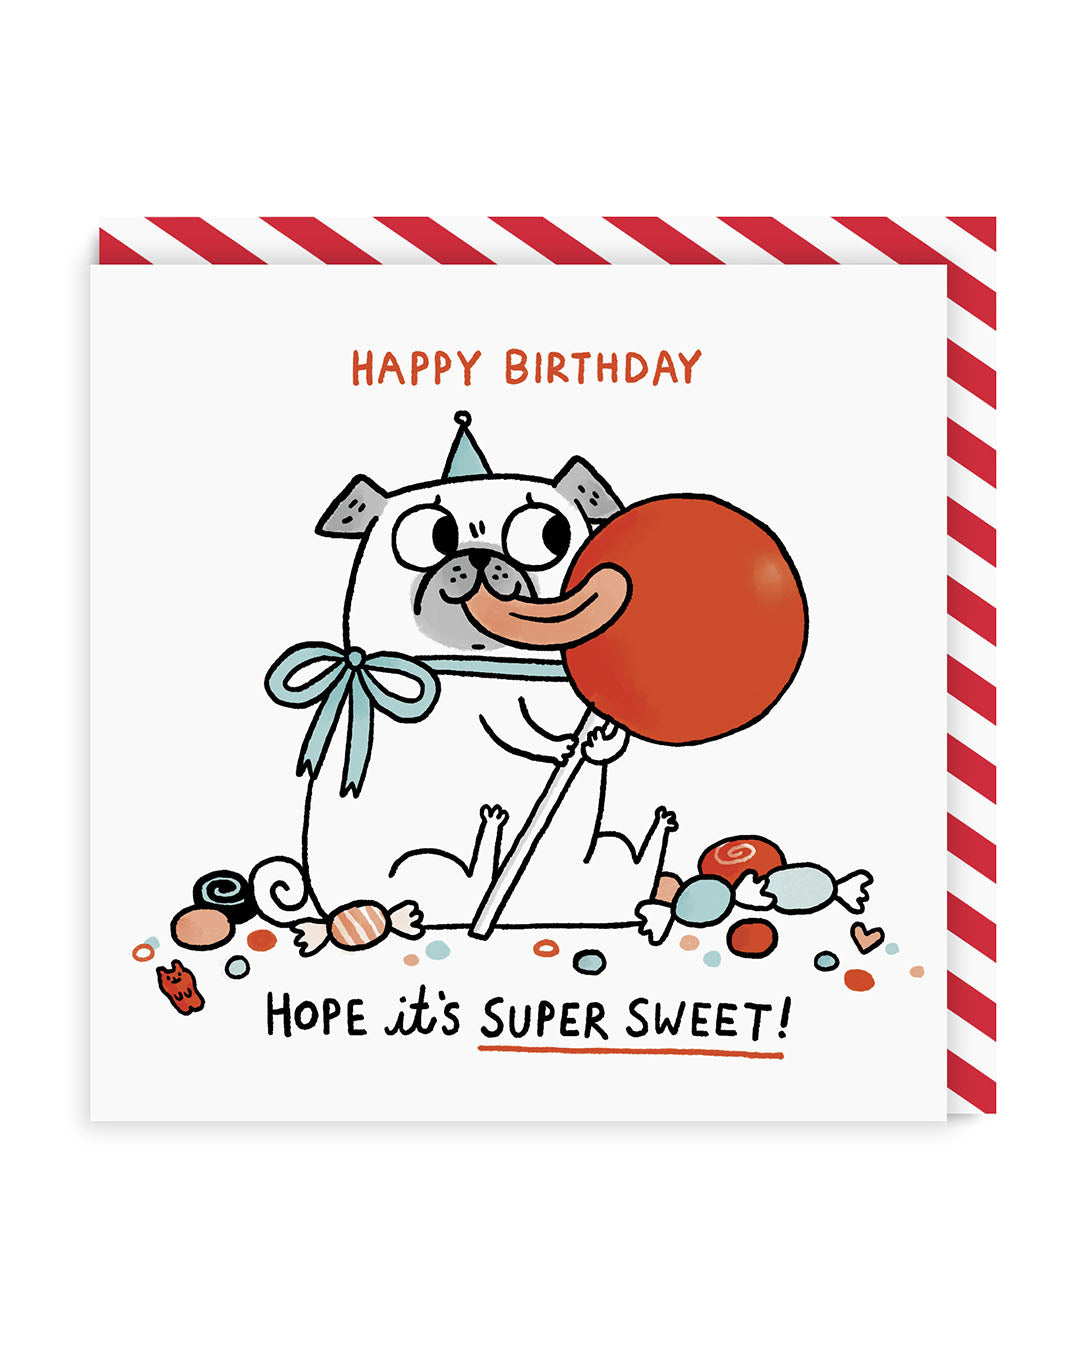 Hope It's Super Sweet Square Greeting Card